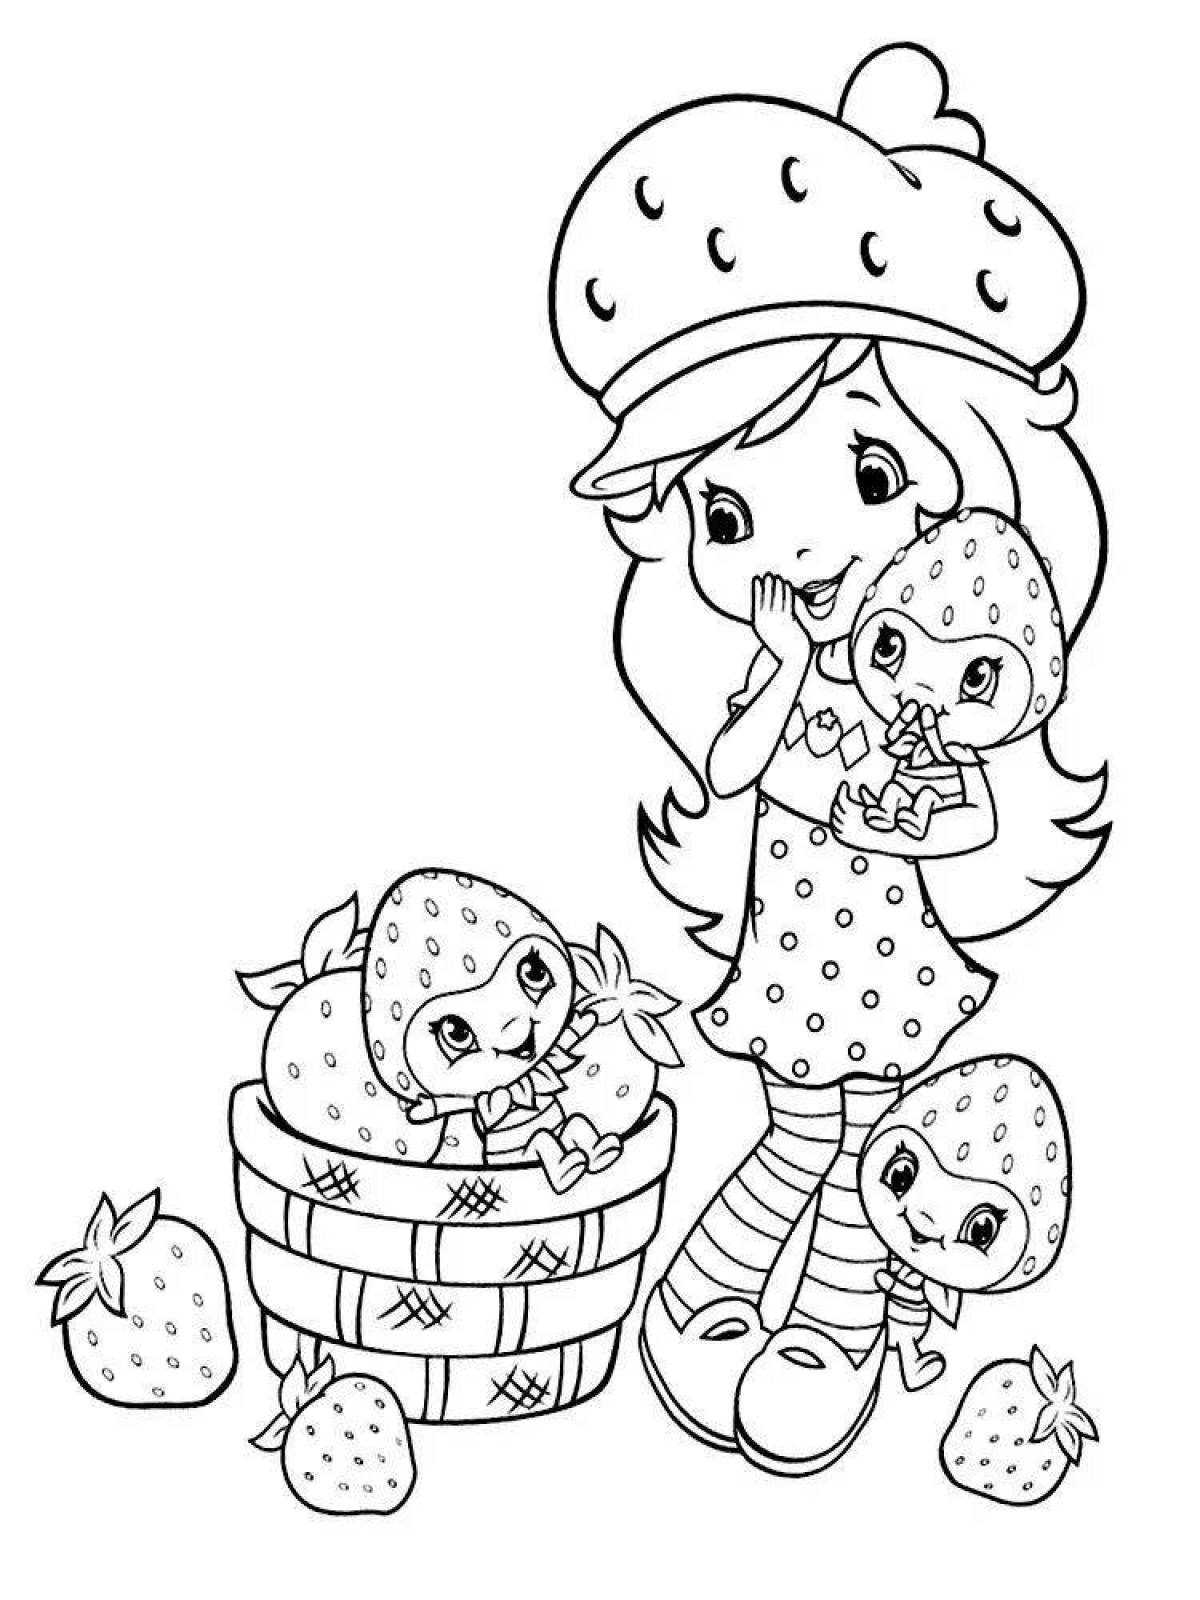 Cute strawberry girl coloring book